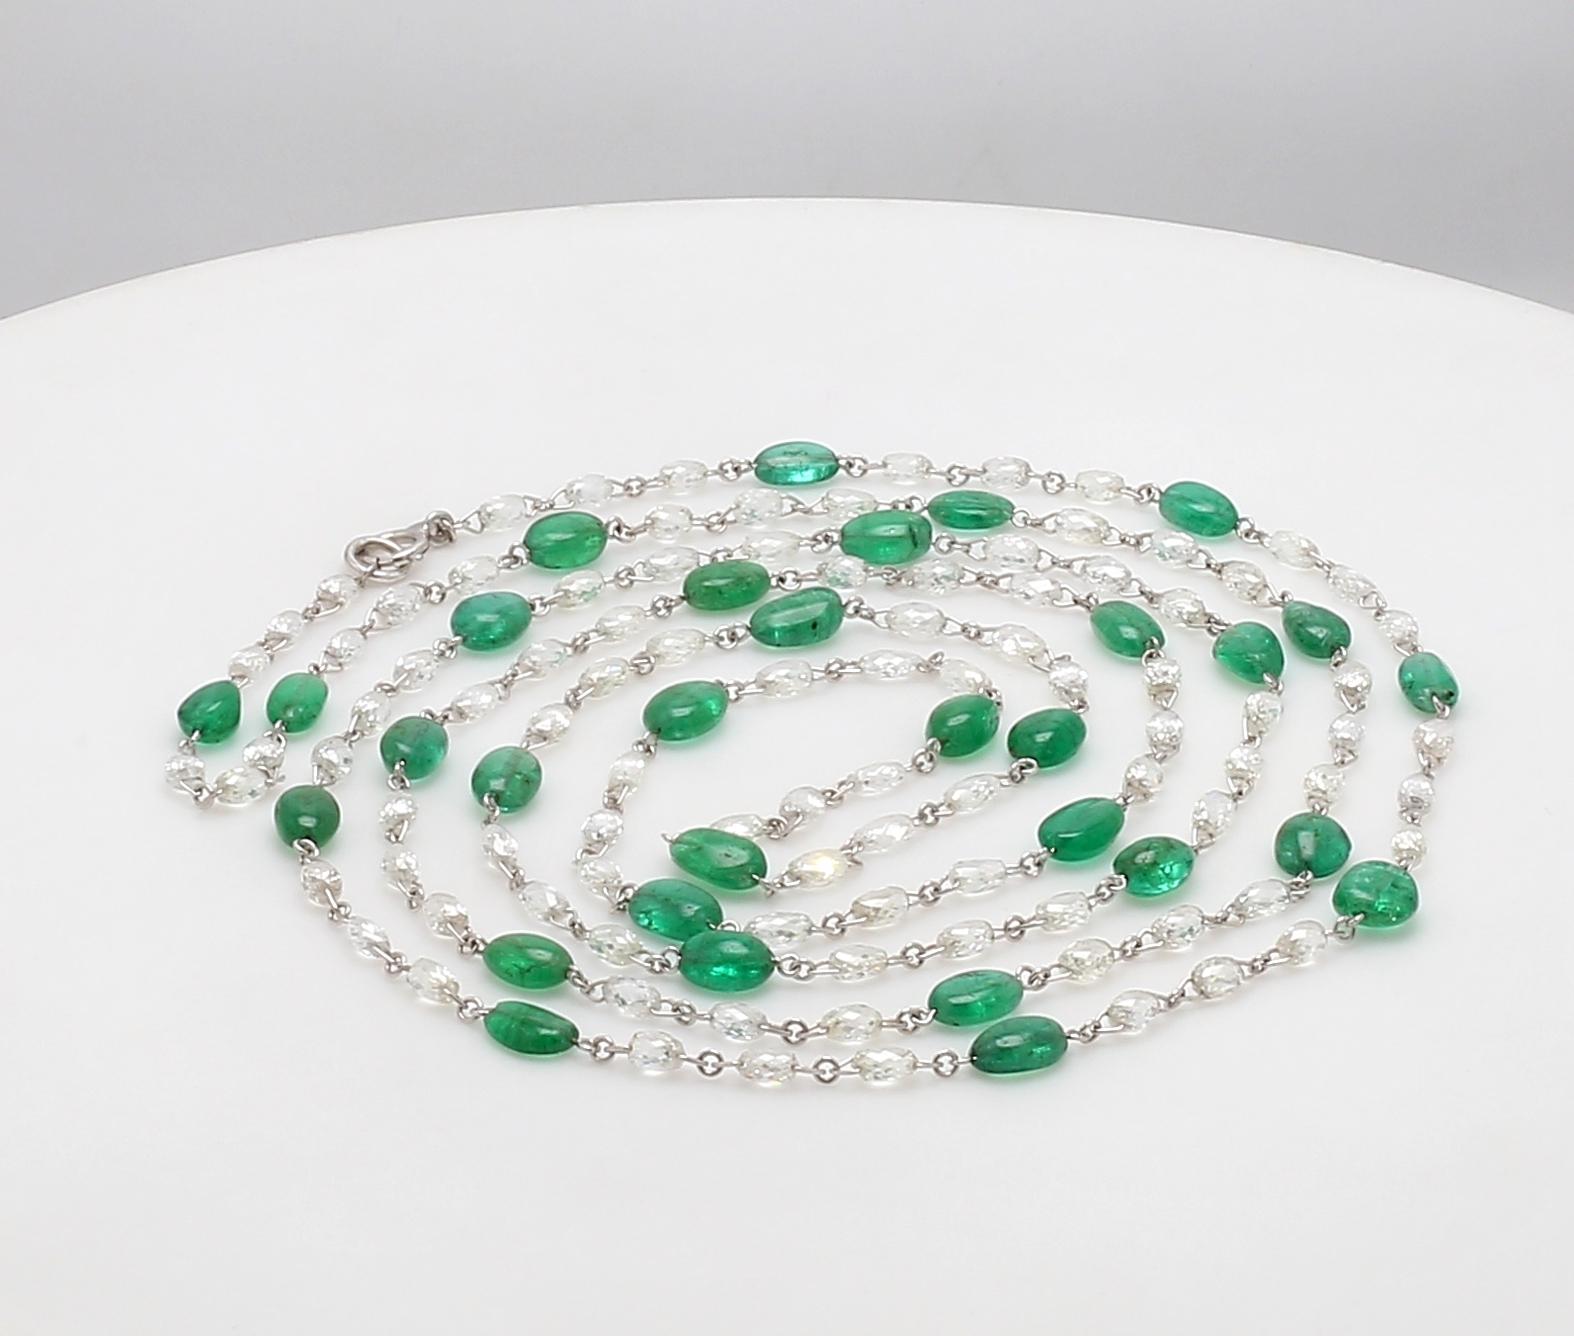 PANIM Diamond Briolette & Emerald Necklace in 18K White Gold 

A beautiful diamond briolette and emerald & 18k gold long necklace by Panim .The Necklace forms a continuous row of diamonds with very little metal in between ,giving a wonderfully